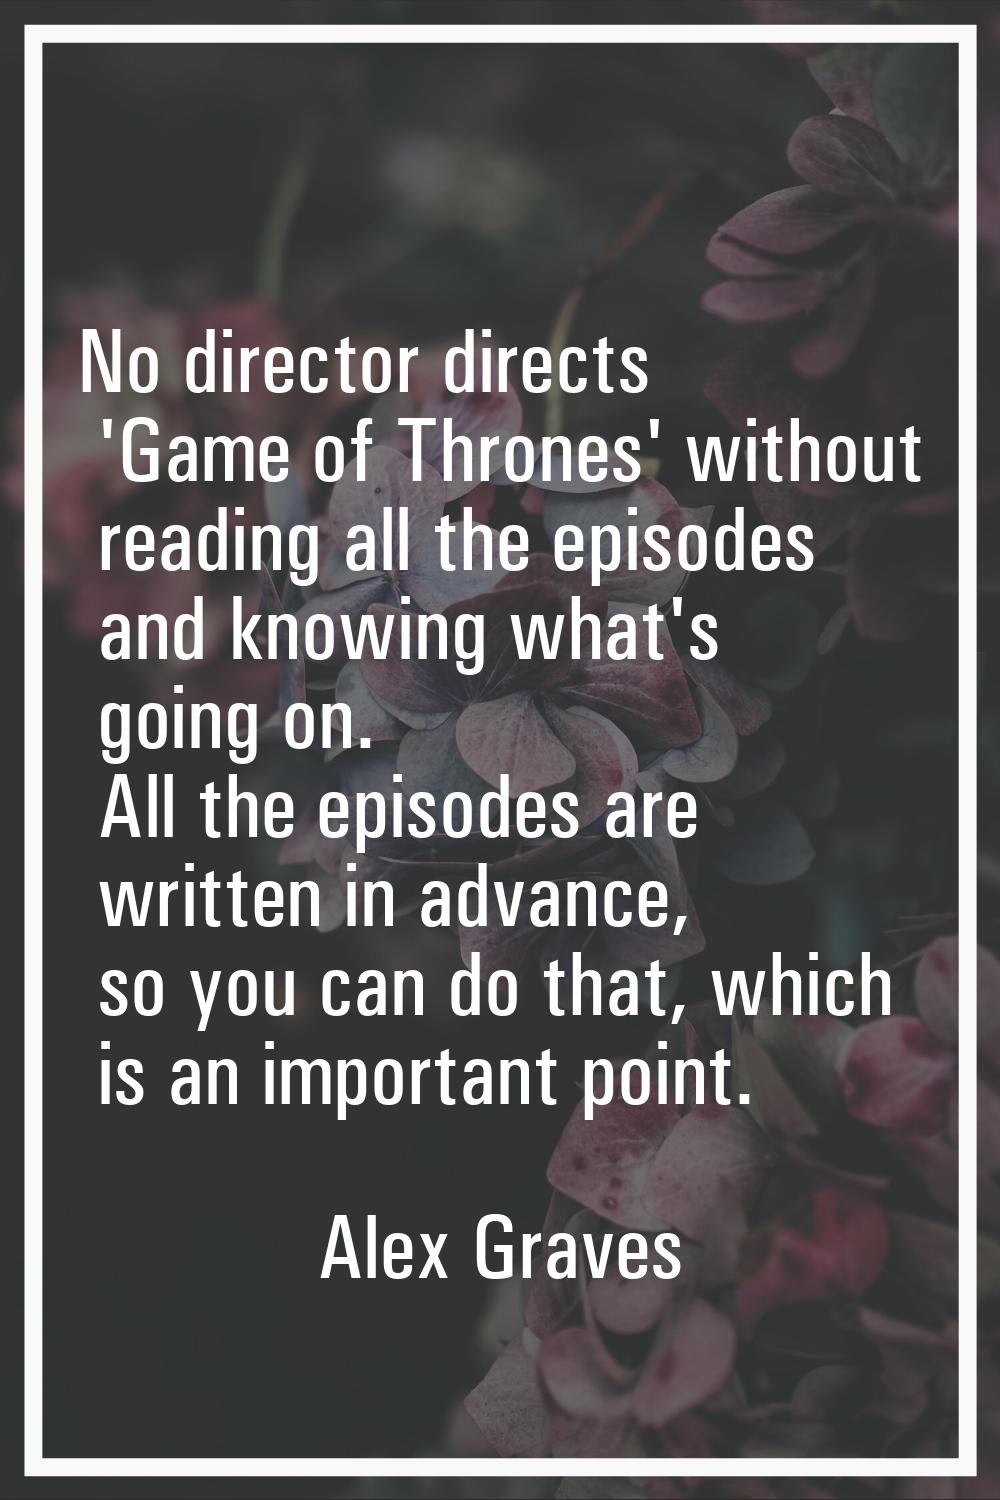 No director directs 'Game of Thrones' without reading all the episodes and knowing what's going on.